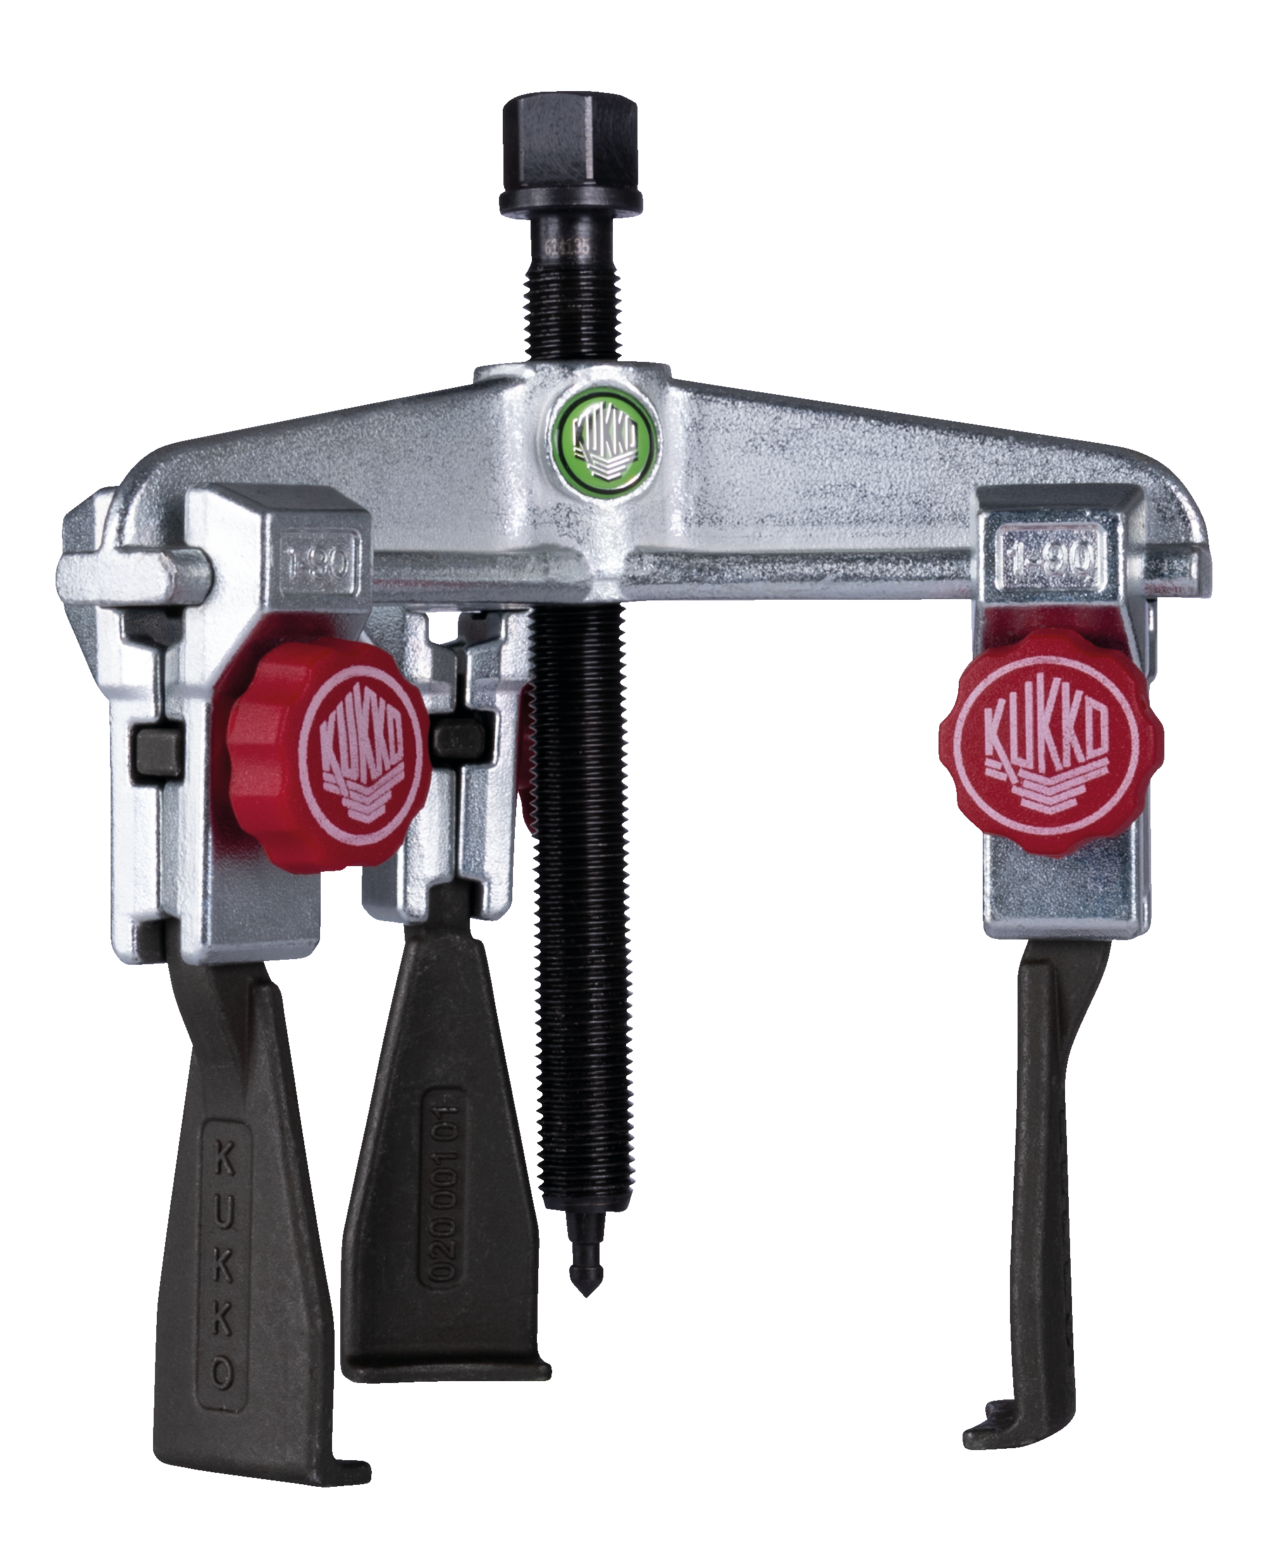 A 3-arm universal puller of the 30+S series with narrow, quick-adjustable puller hooks for pulling off bearings, gears and pulleys